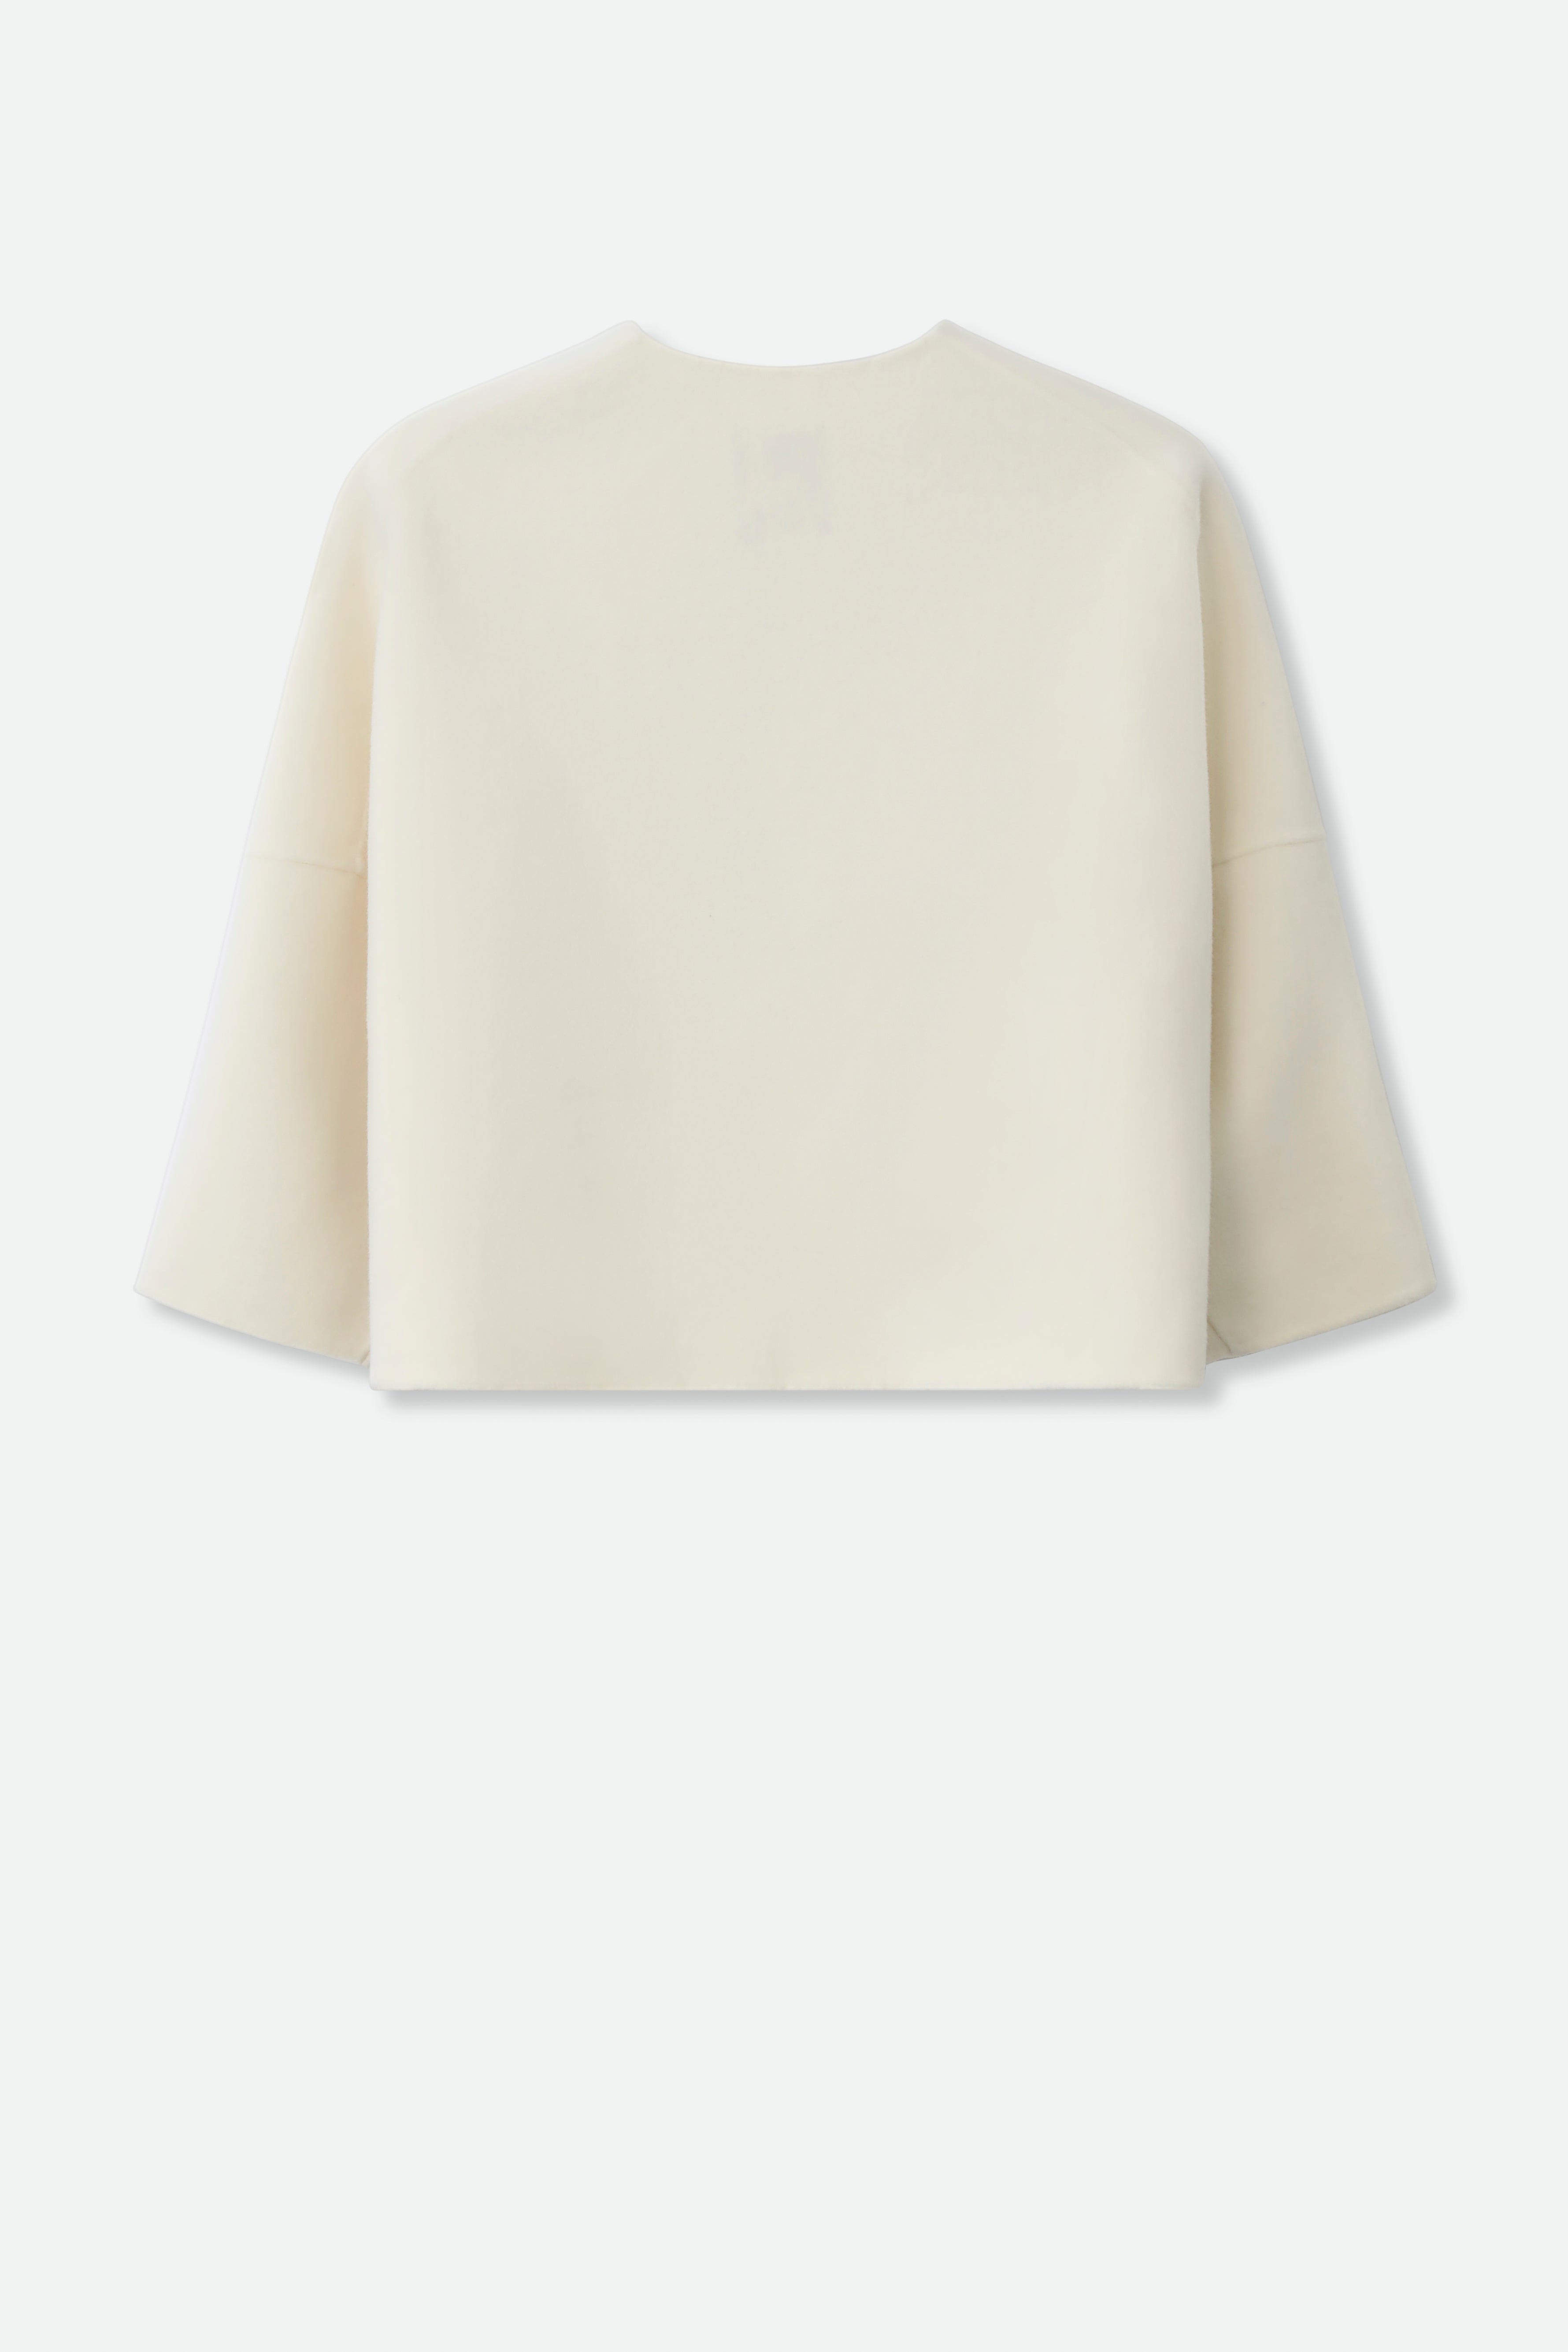 ADELAIDE SHORT SNAP JACKET IN DOUBLE-FACE CASHMERE WOOL - Jarbo